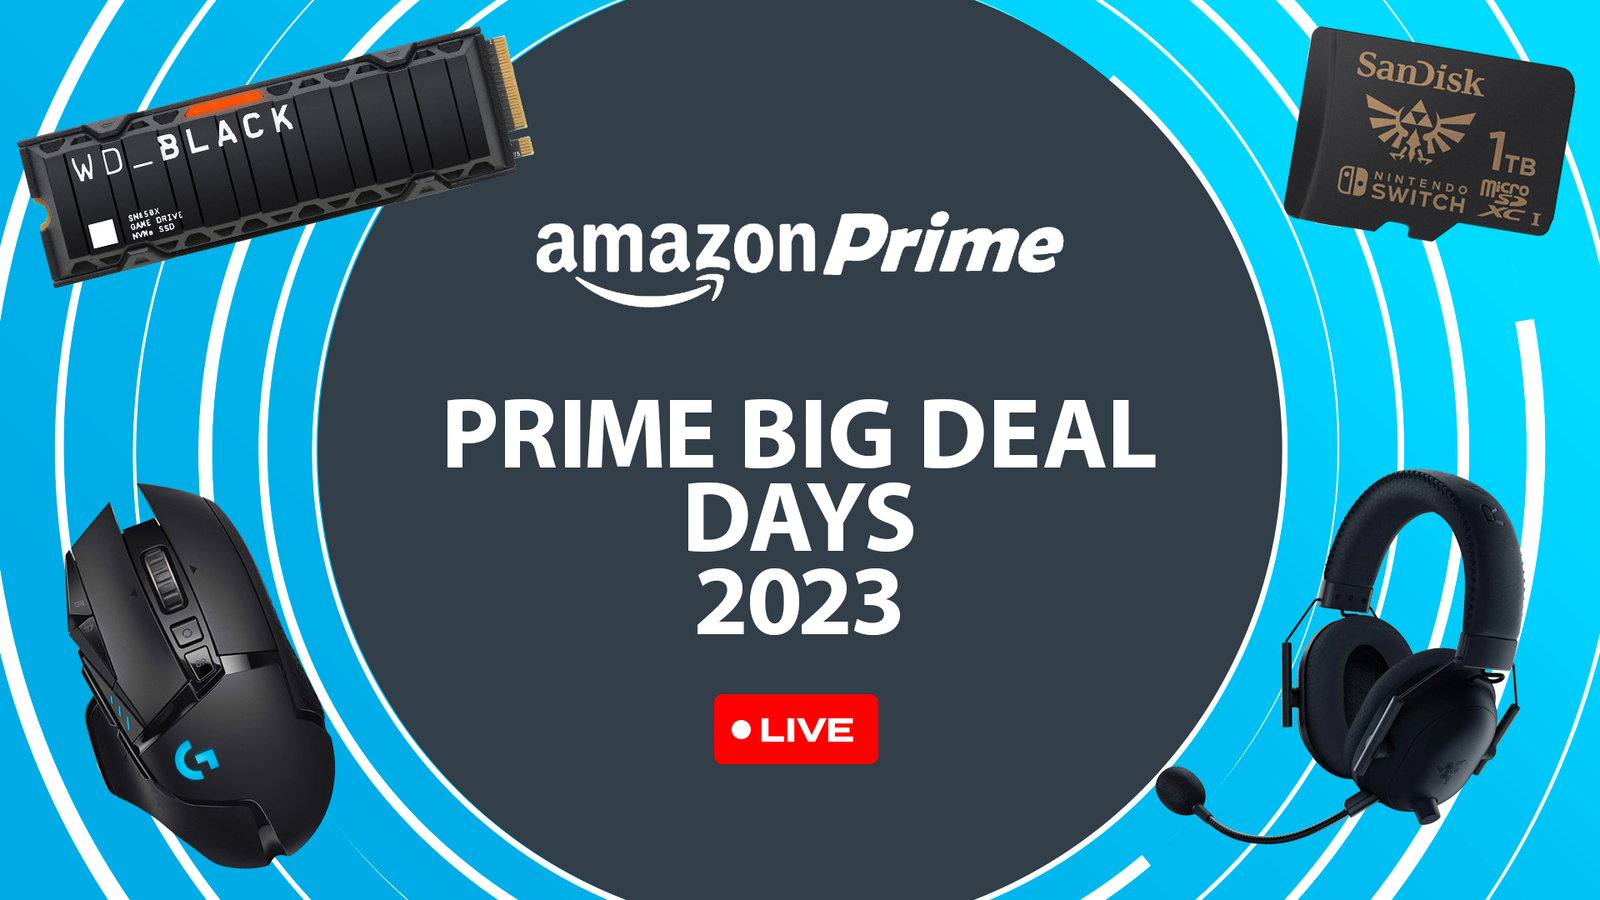 Twitch Prime Gaming Deals Prime Day 2020: the Best Deals We Expect